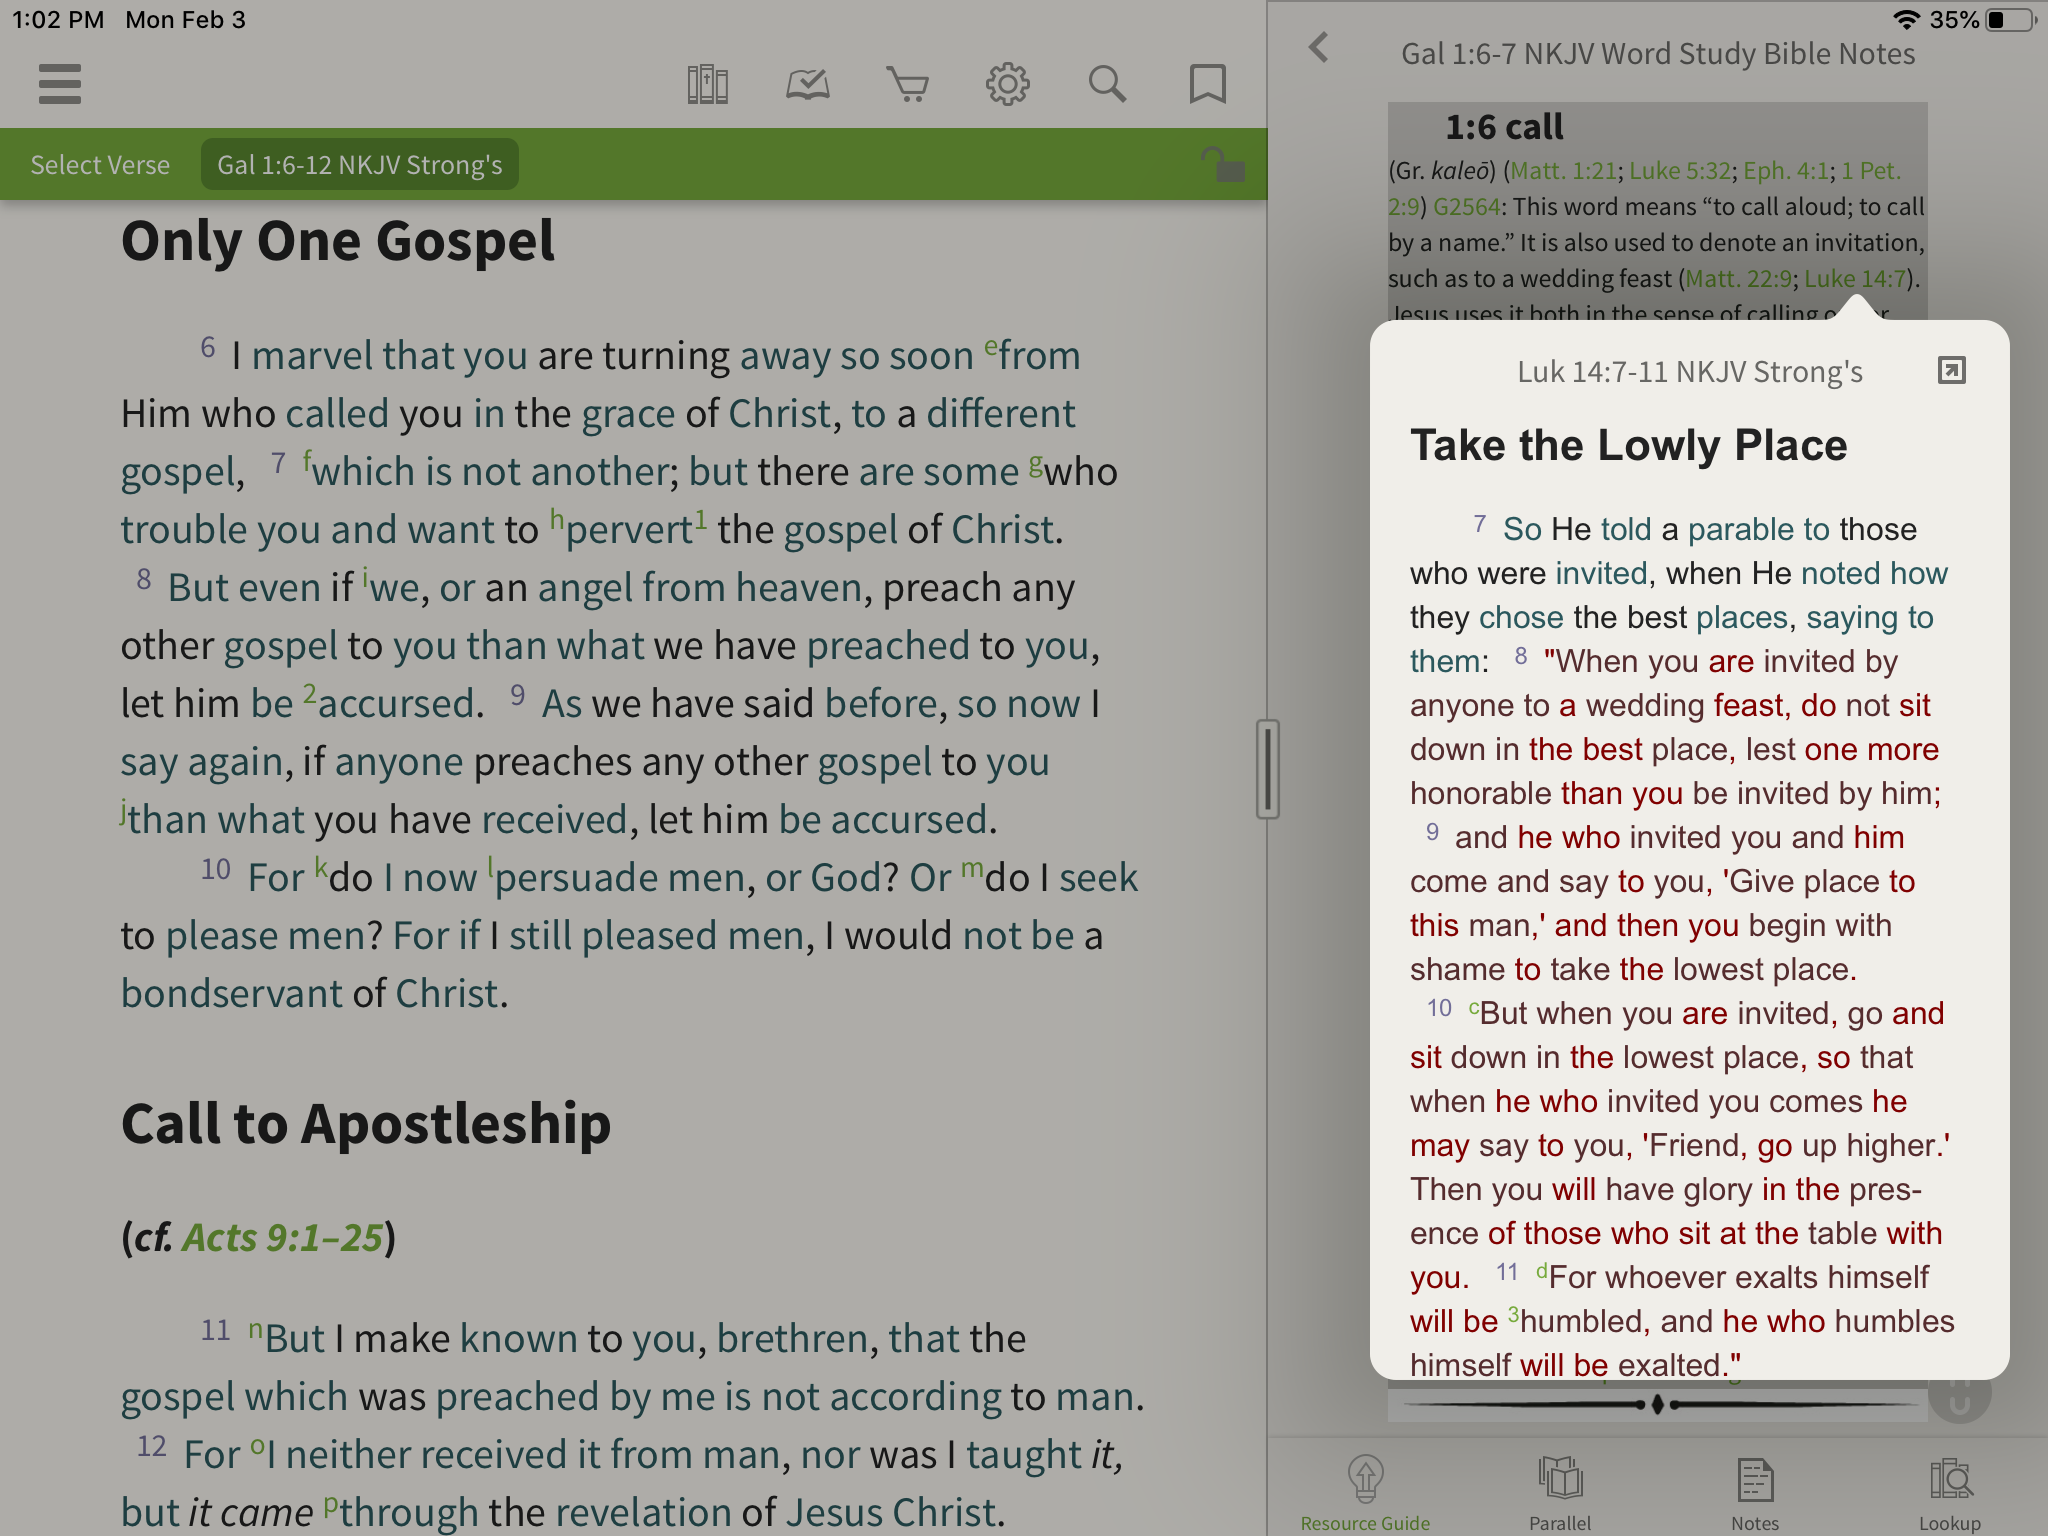 hyperlinked notes in the word study bible